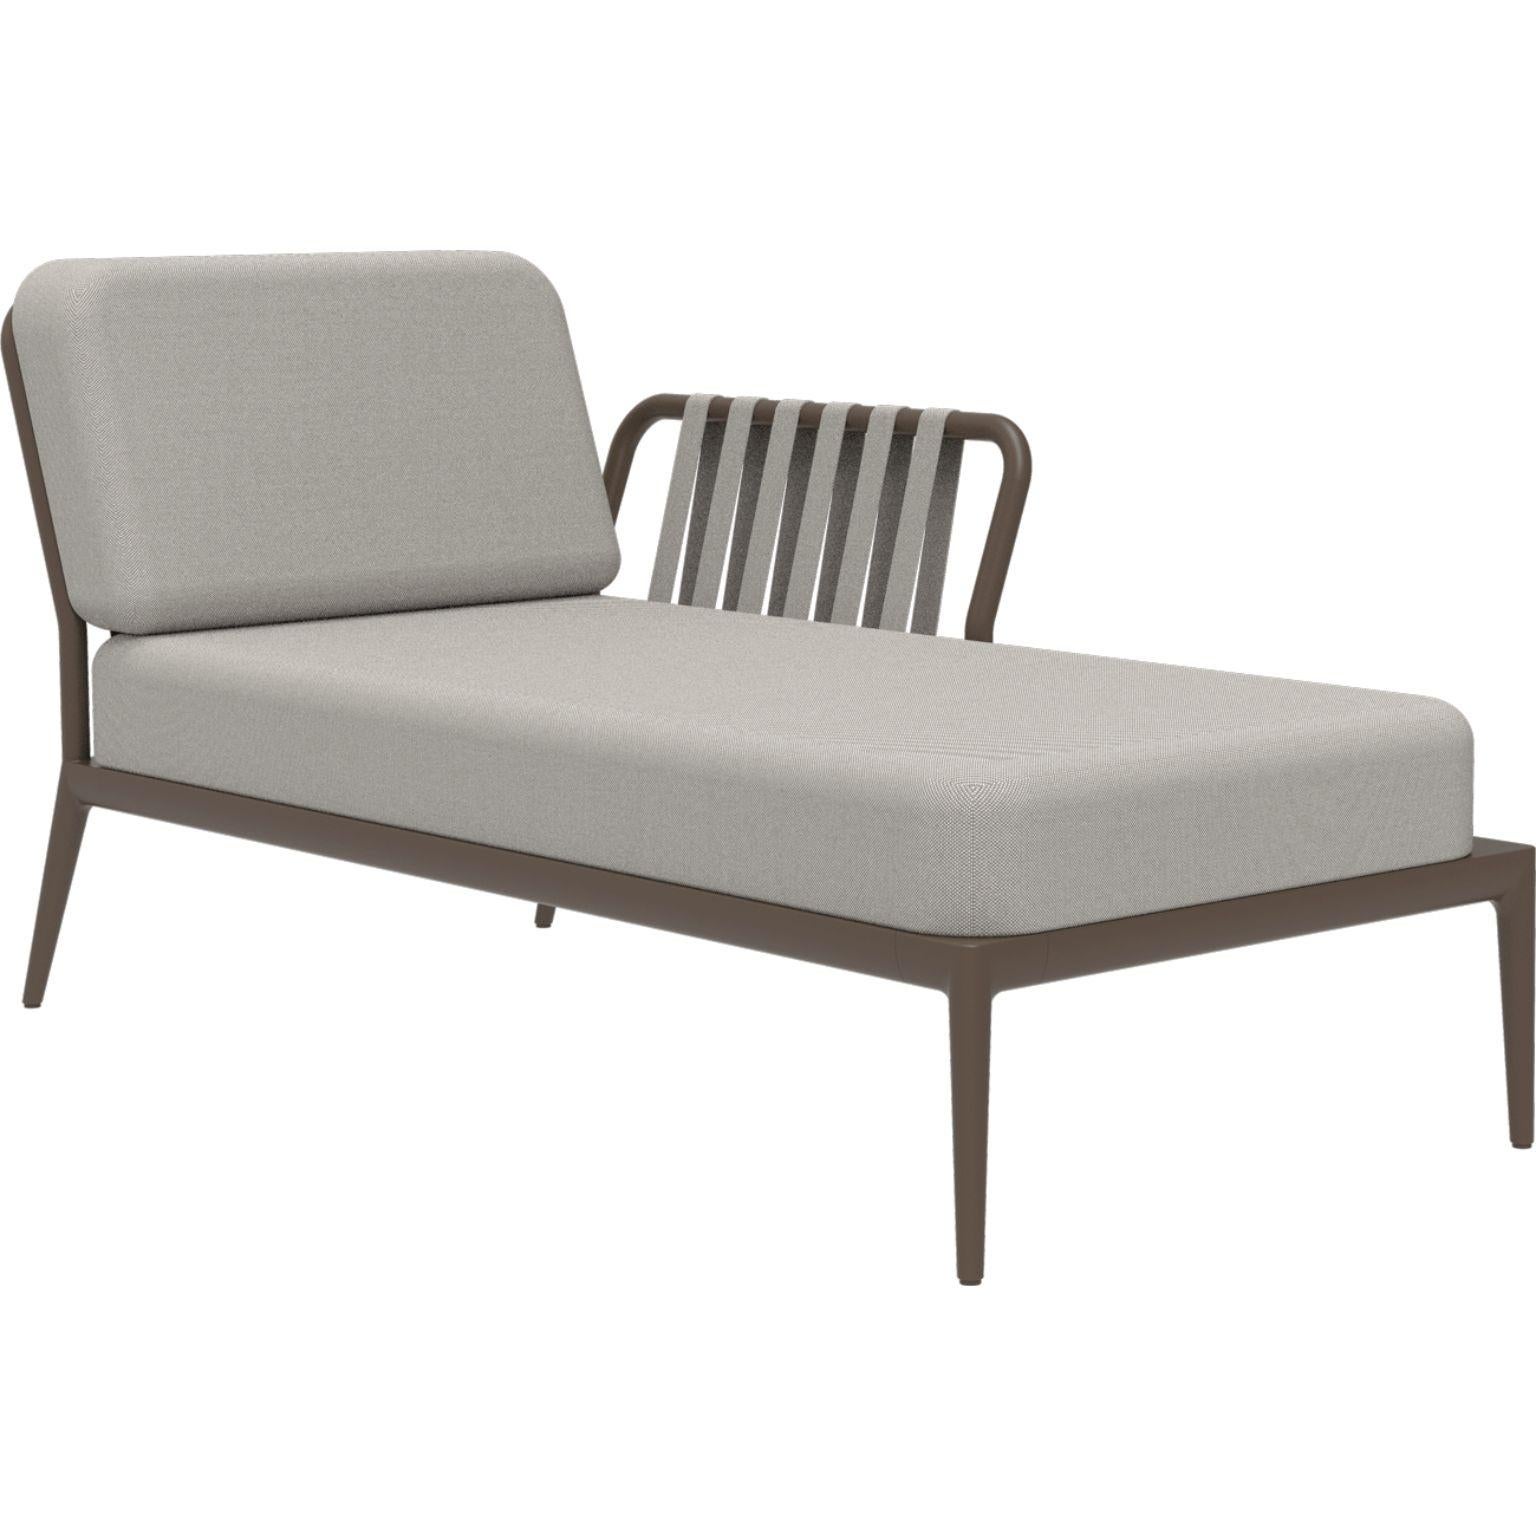 Ribbons Bronze Left Chaise Longue by MOWEE.
Dimensions: D80 x W155 x H81 cm.
Material: Aluminum, Upholstery.
Weight: 28 kg
Also Available in different colours and finishes.

An unmistakable collection for its beauty and robustness. A tribute